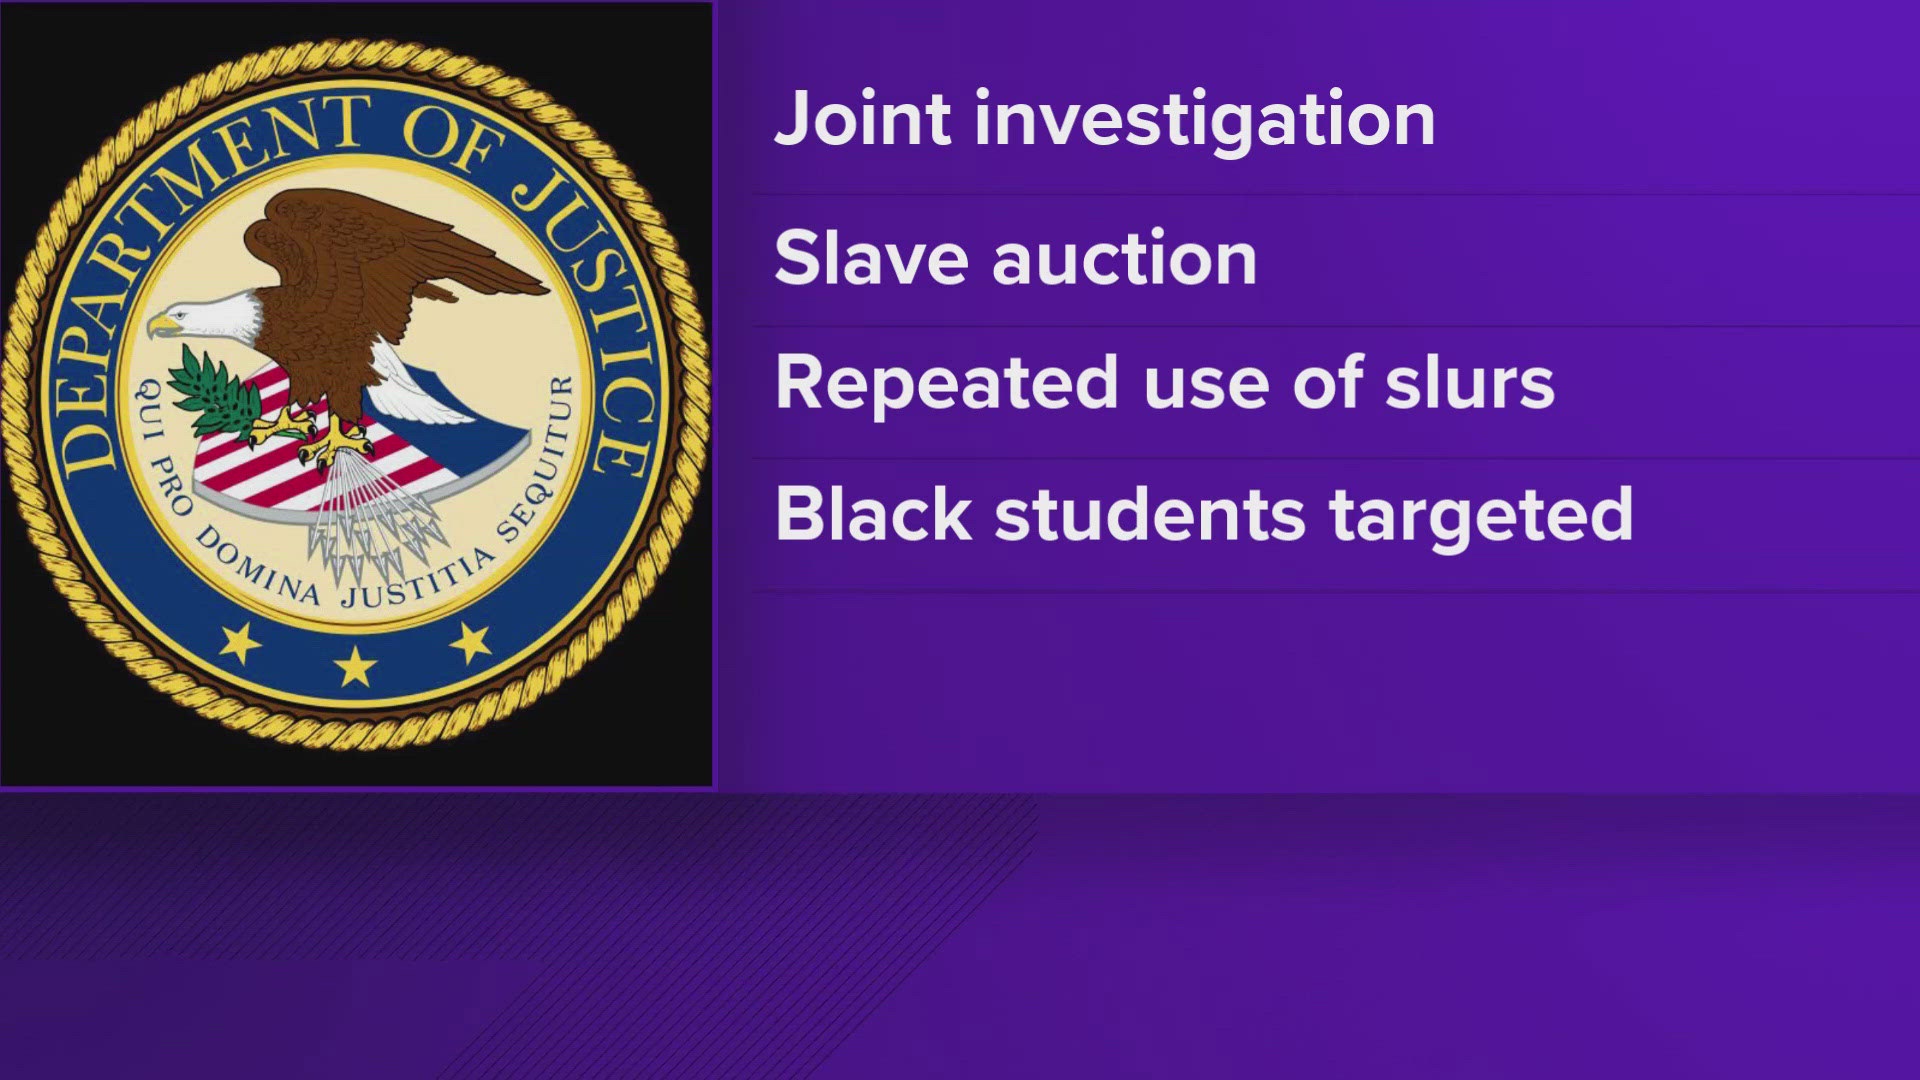 The Department of Justice said Hawkins County students hosted a mock "slave auction," openly used racial slurs and led a campaign to ridicule Black students.